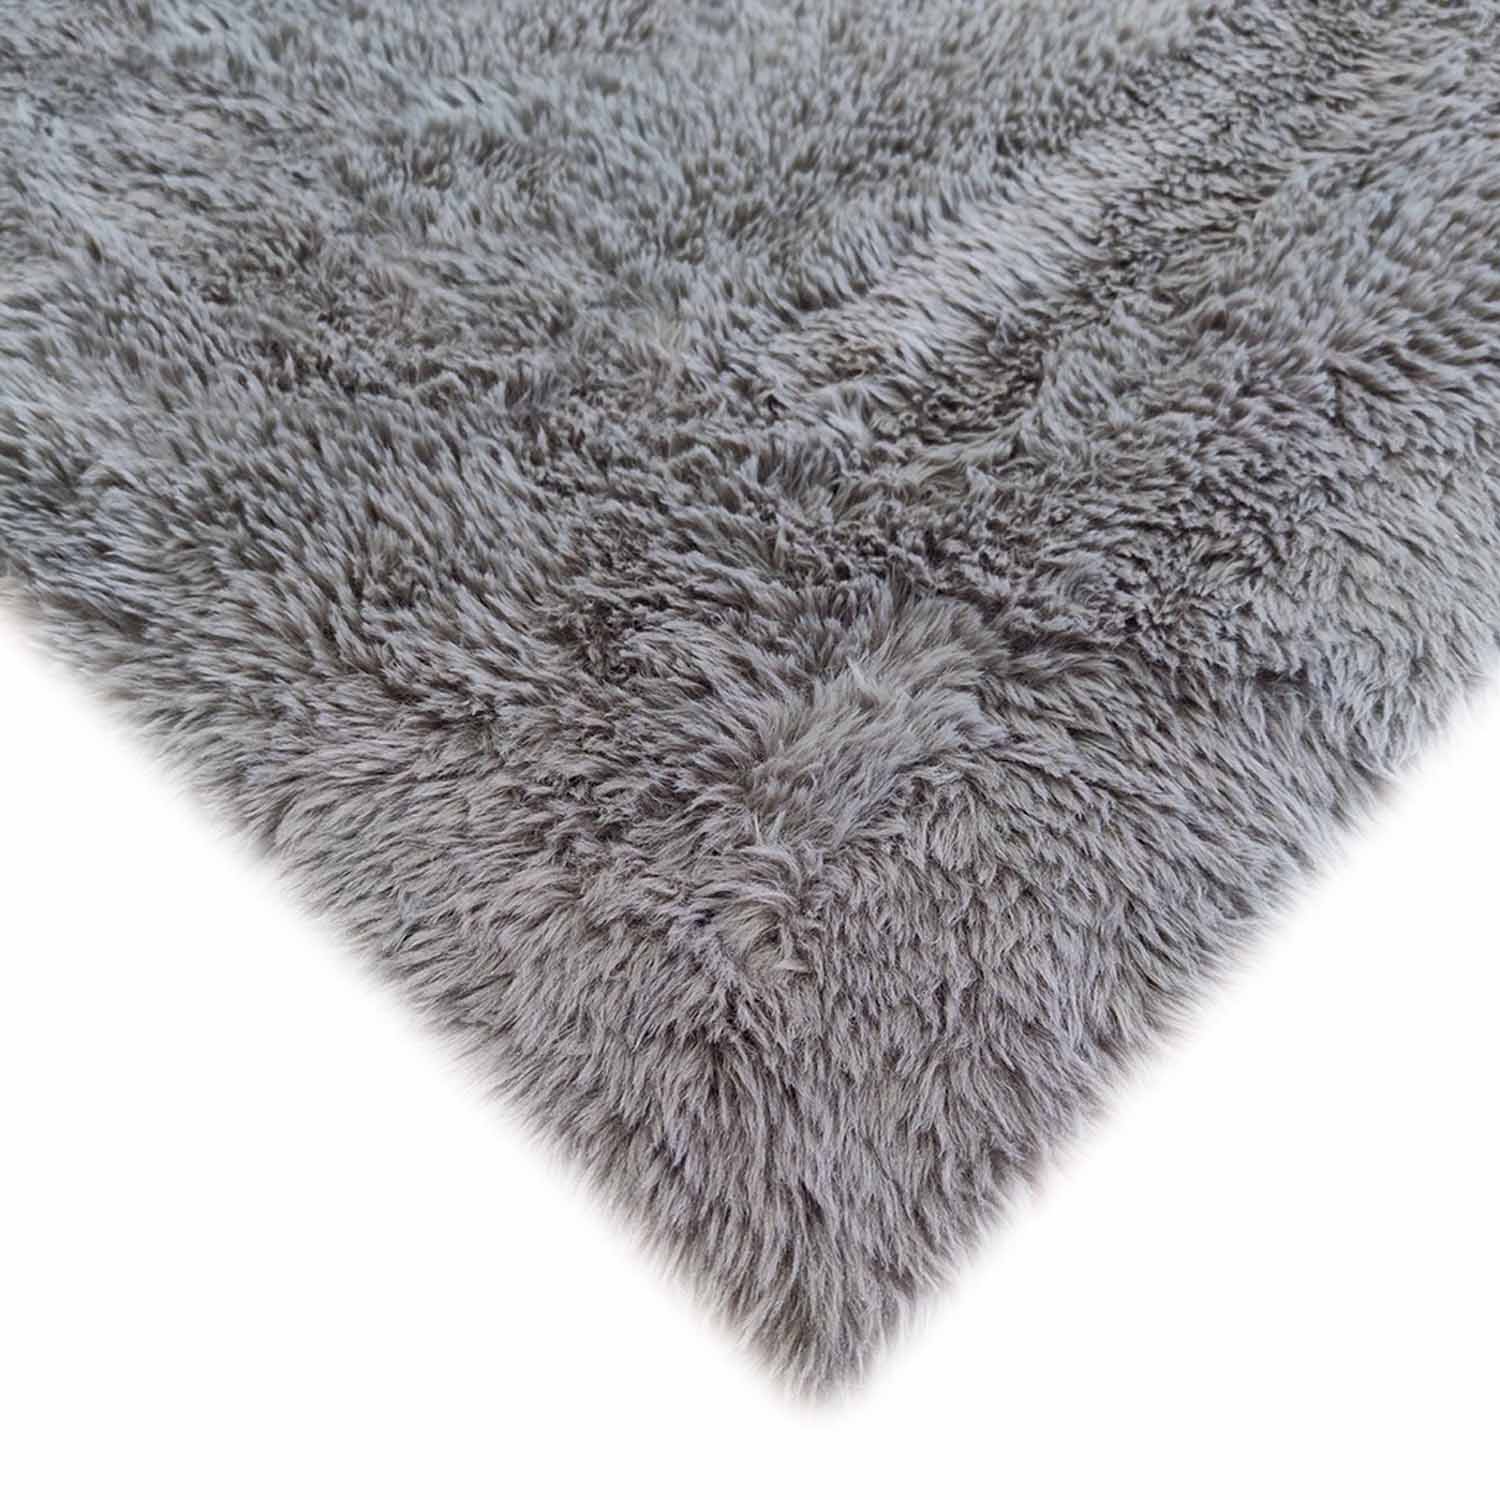 The Home Living Room Sheepskin Rug 120cm x 160cm - Charcoal 2 Shaws Department Stores